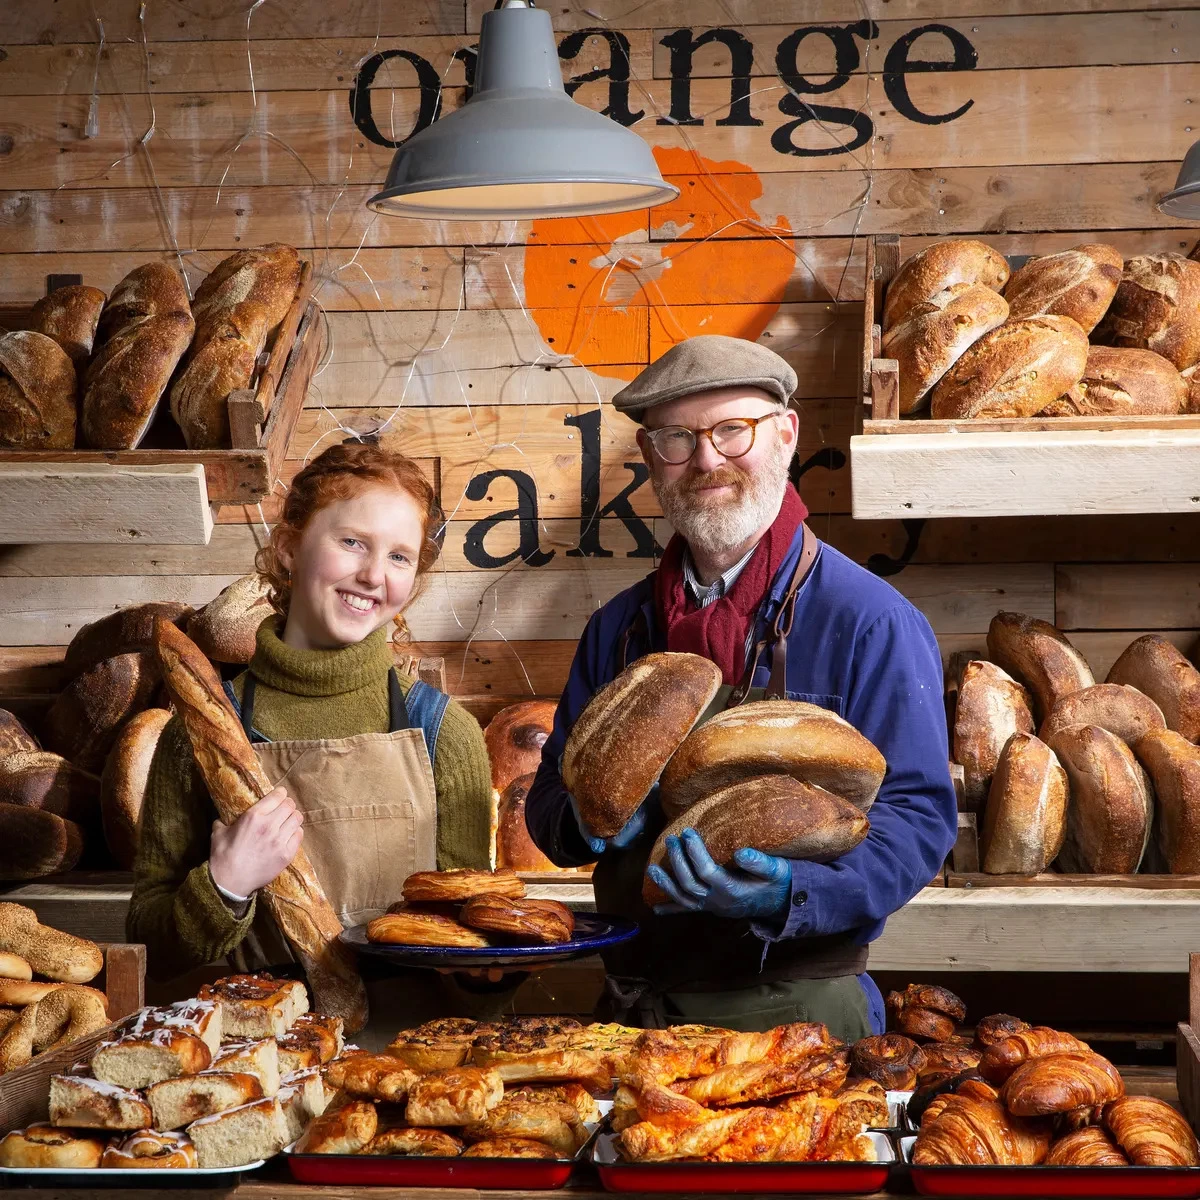 Kitty Tait and Al Tait, founders of Kitty's Kits and The Orange Bakery, smiling at the camera, stood in their bakery, holding bread.